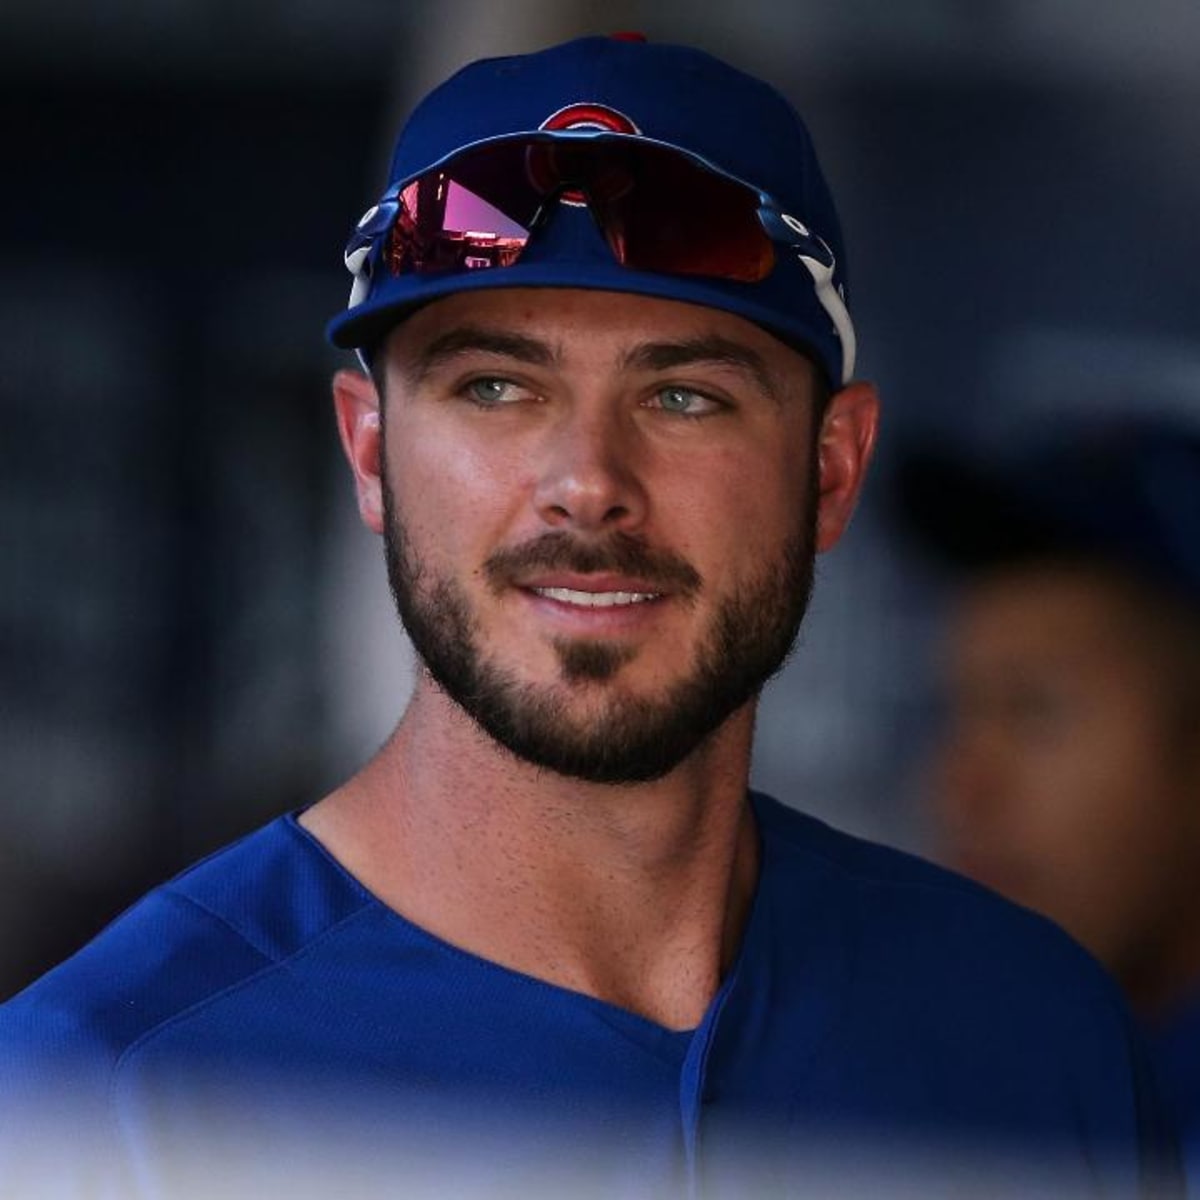 Slumping Cubs send Kris Bryant to disabled list for first time in his career